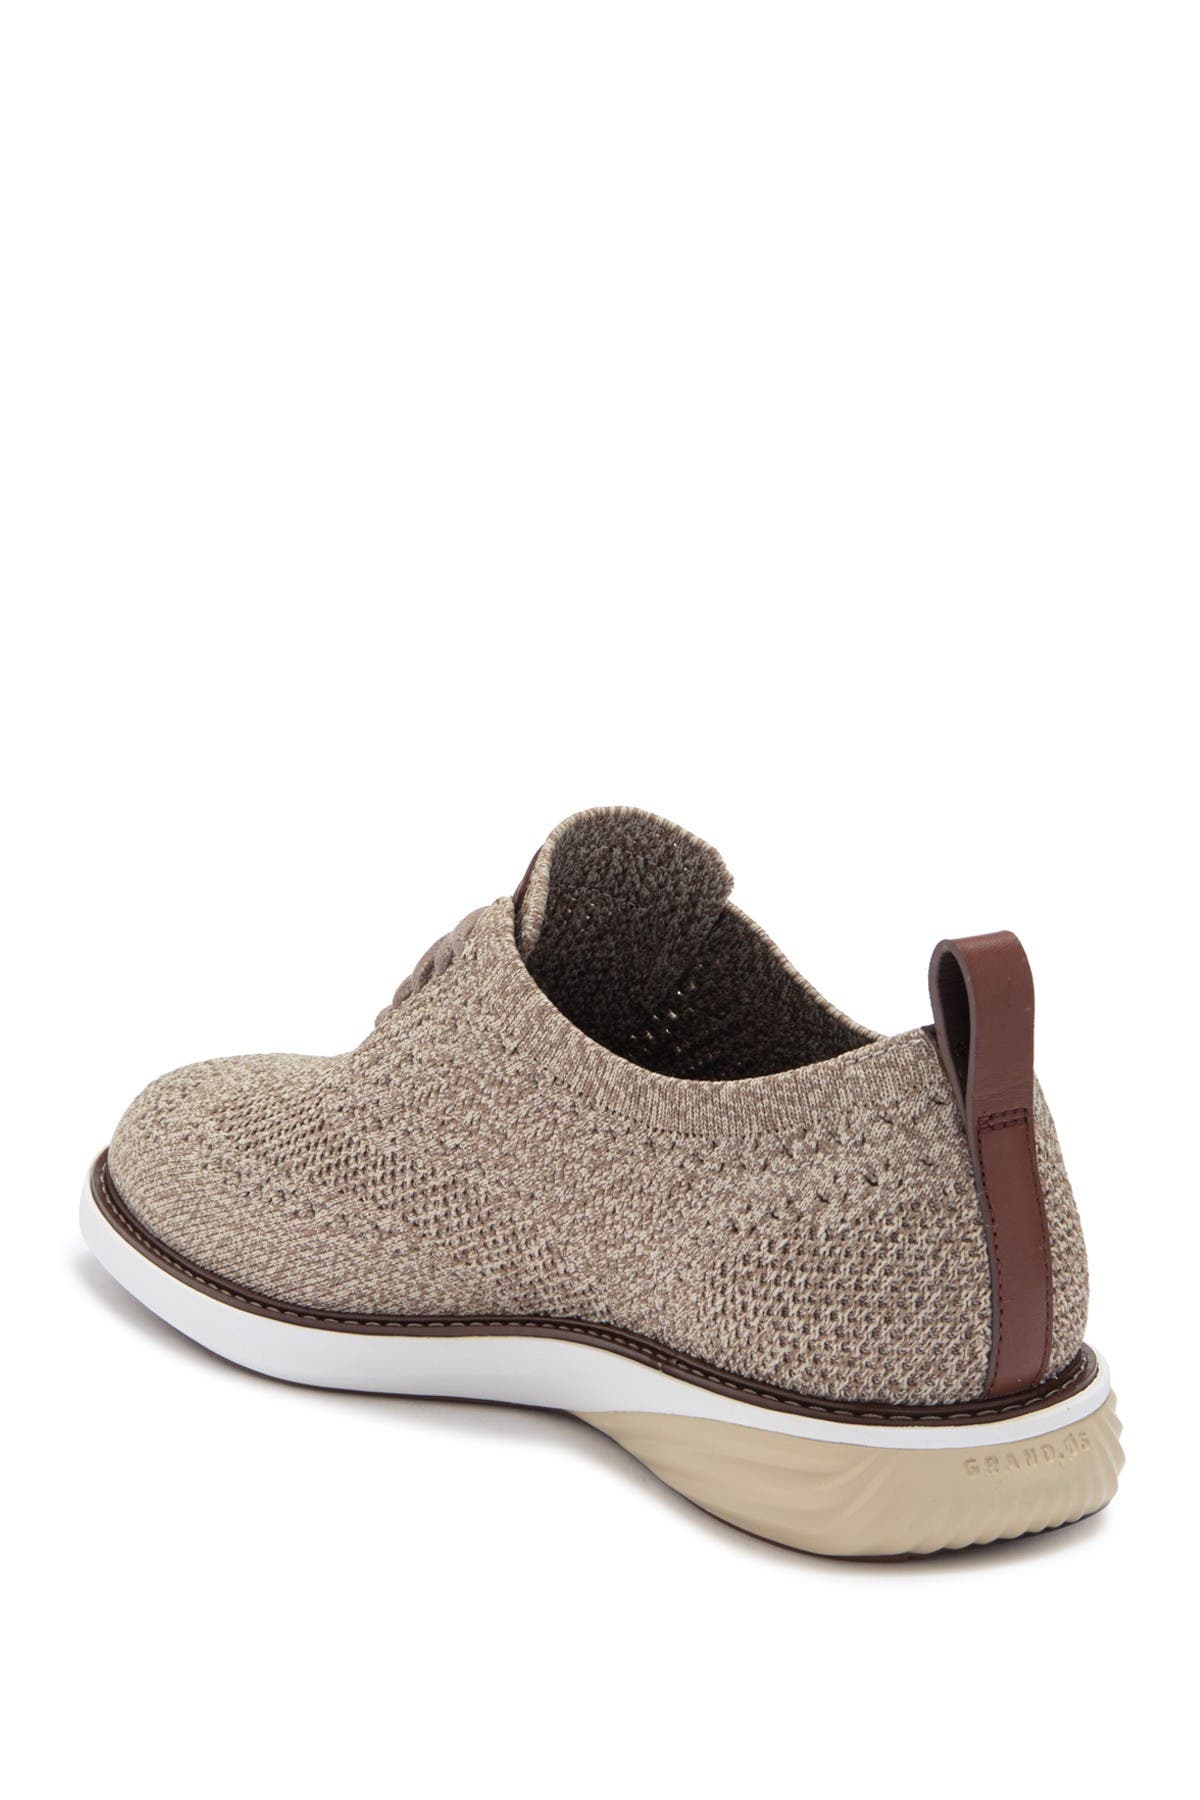 Cole Haan Grand Evolution Stitch Light Oxford In Cement/wal